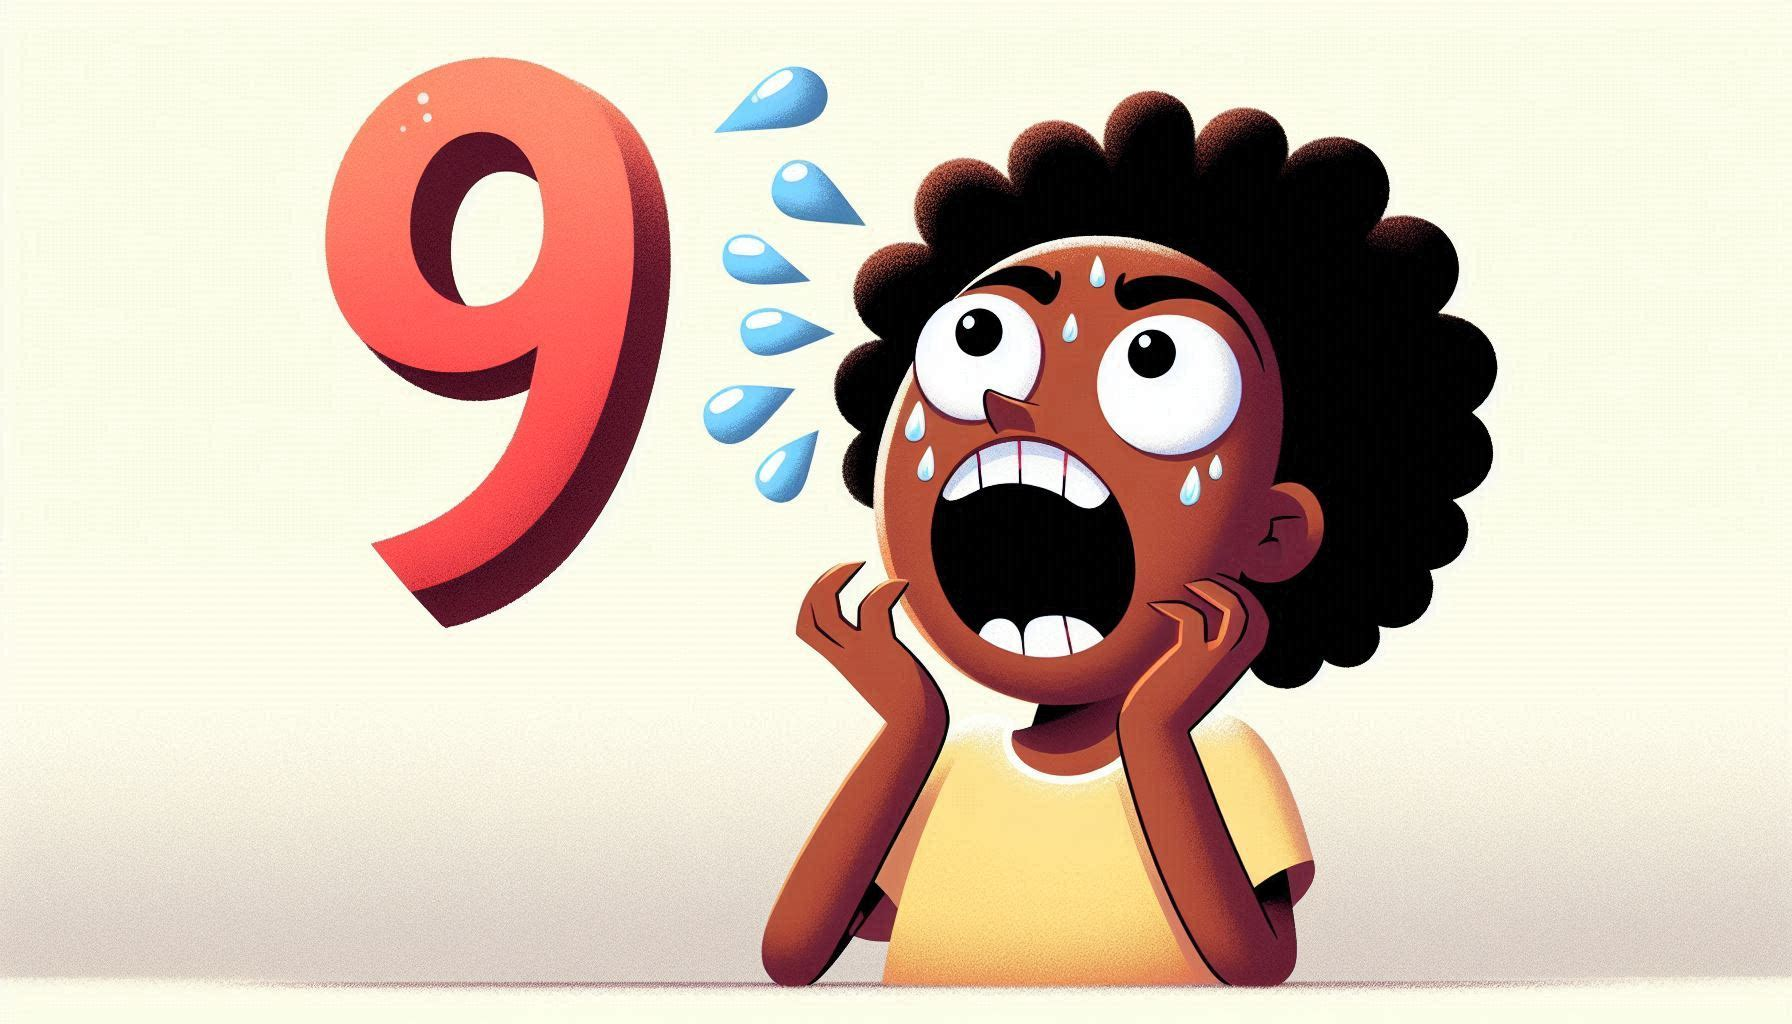 Cartoon illustration of a woman afraid of the number 9.